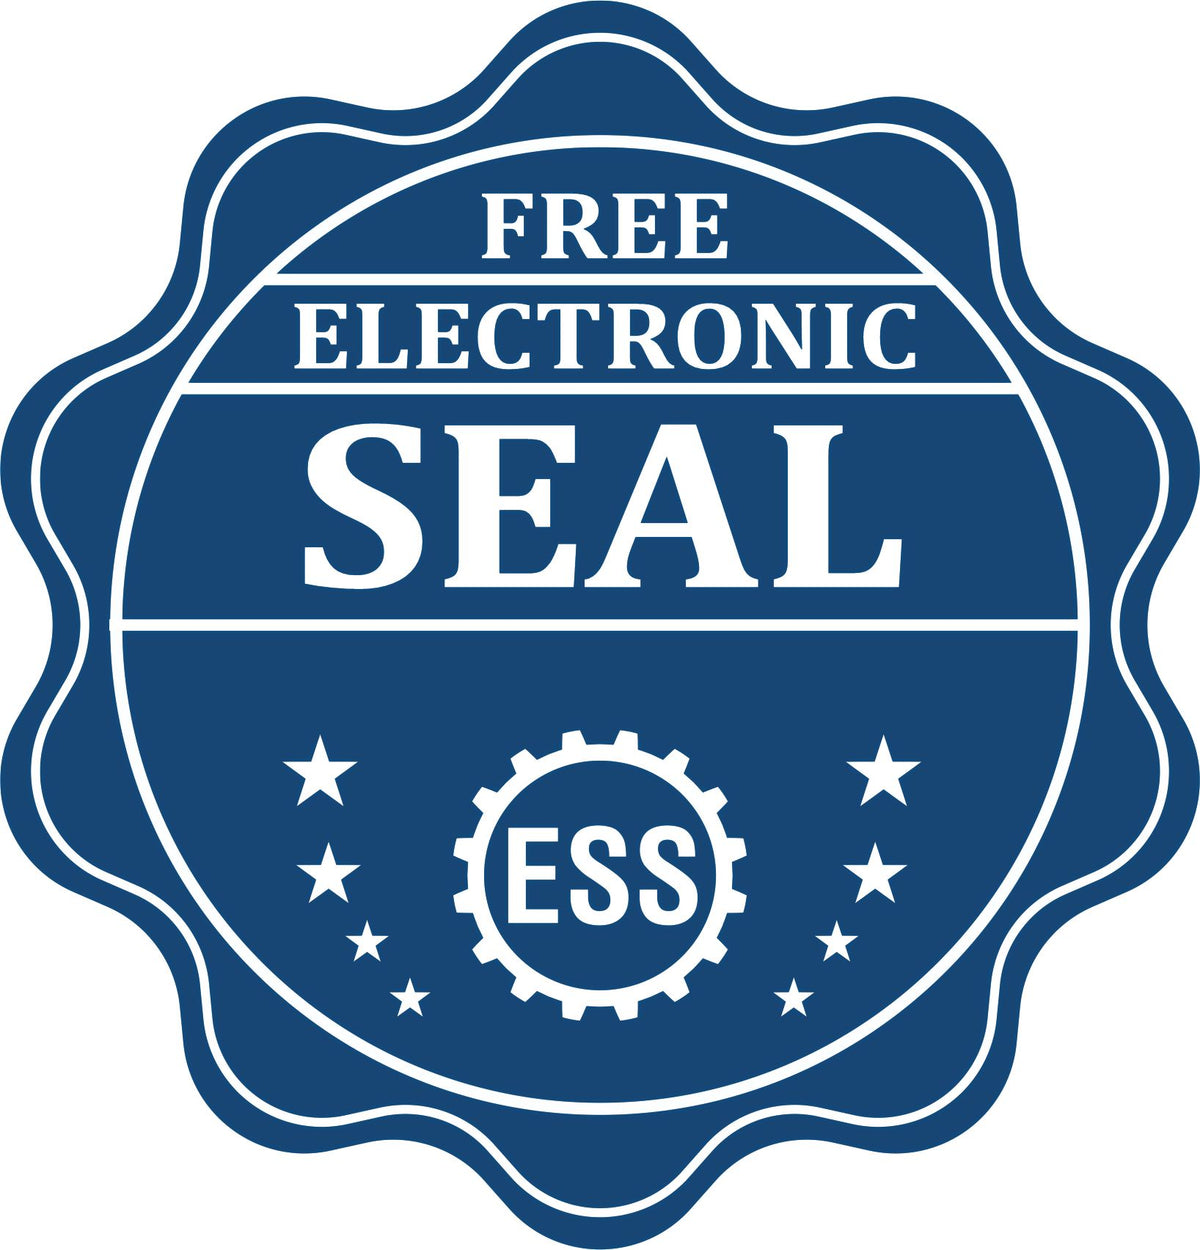 A badge showing a free electronic seal for the Heavy Duty Cast Iron Connecticut Land Surveyor Seal Embosser with stars and the ESS gear on the emblem.